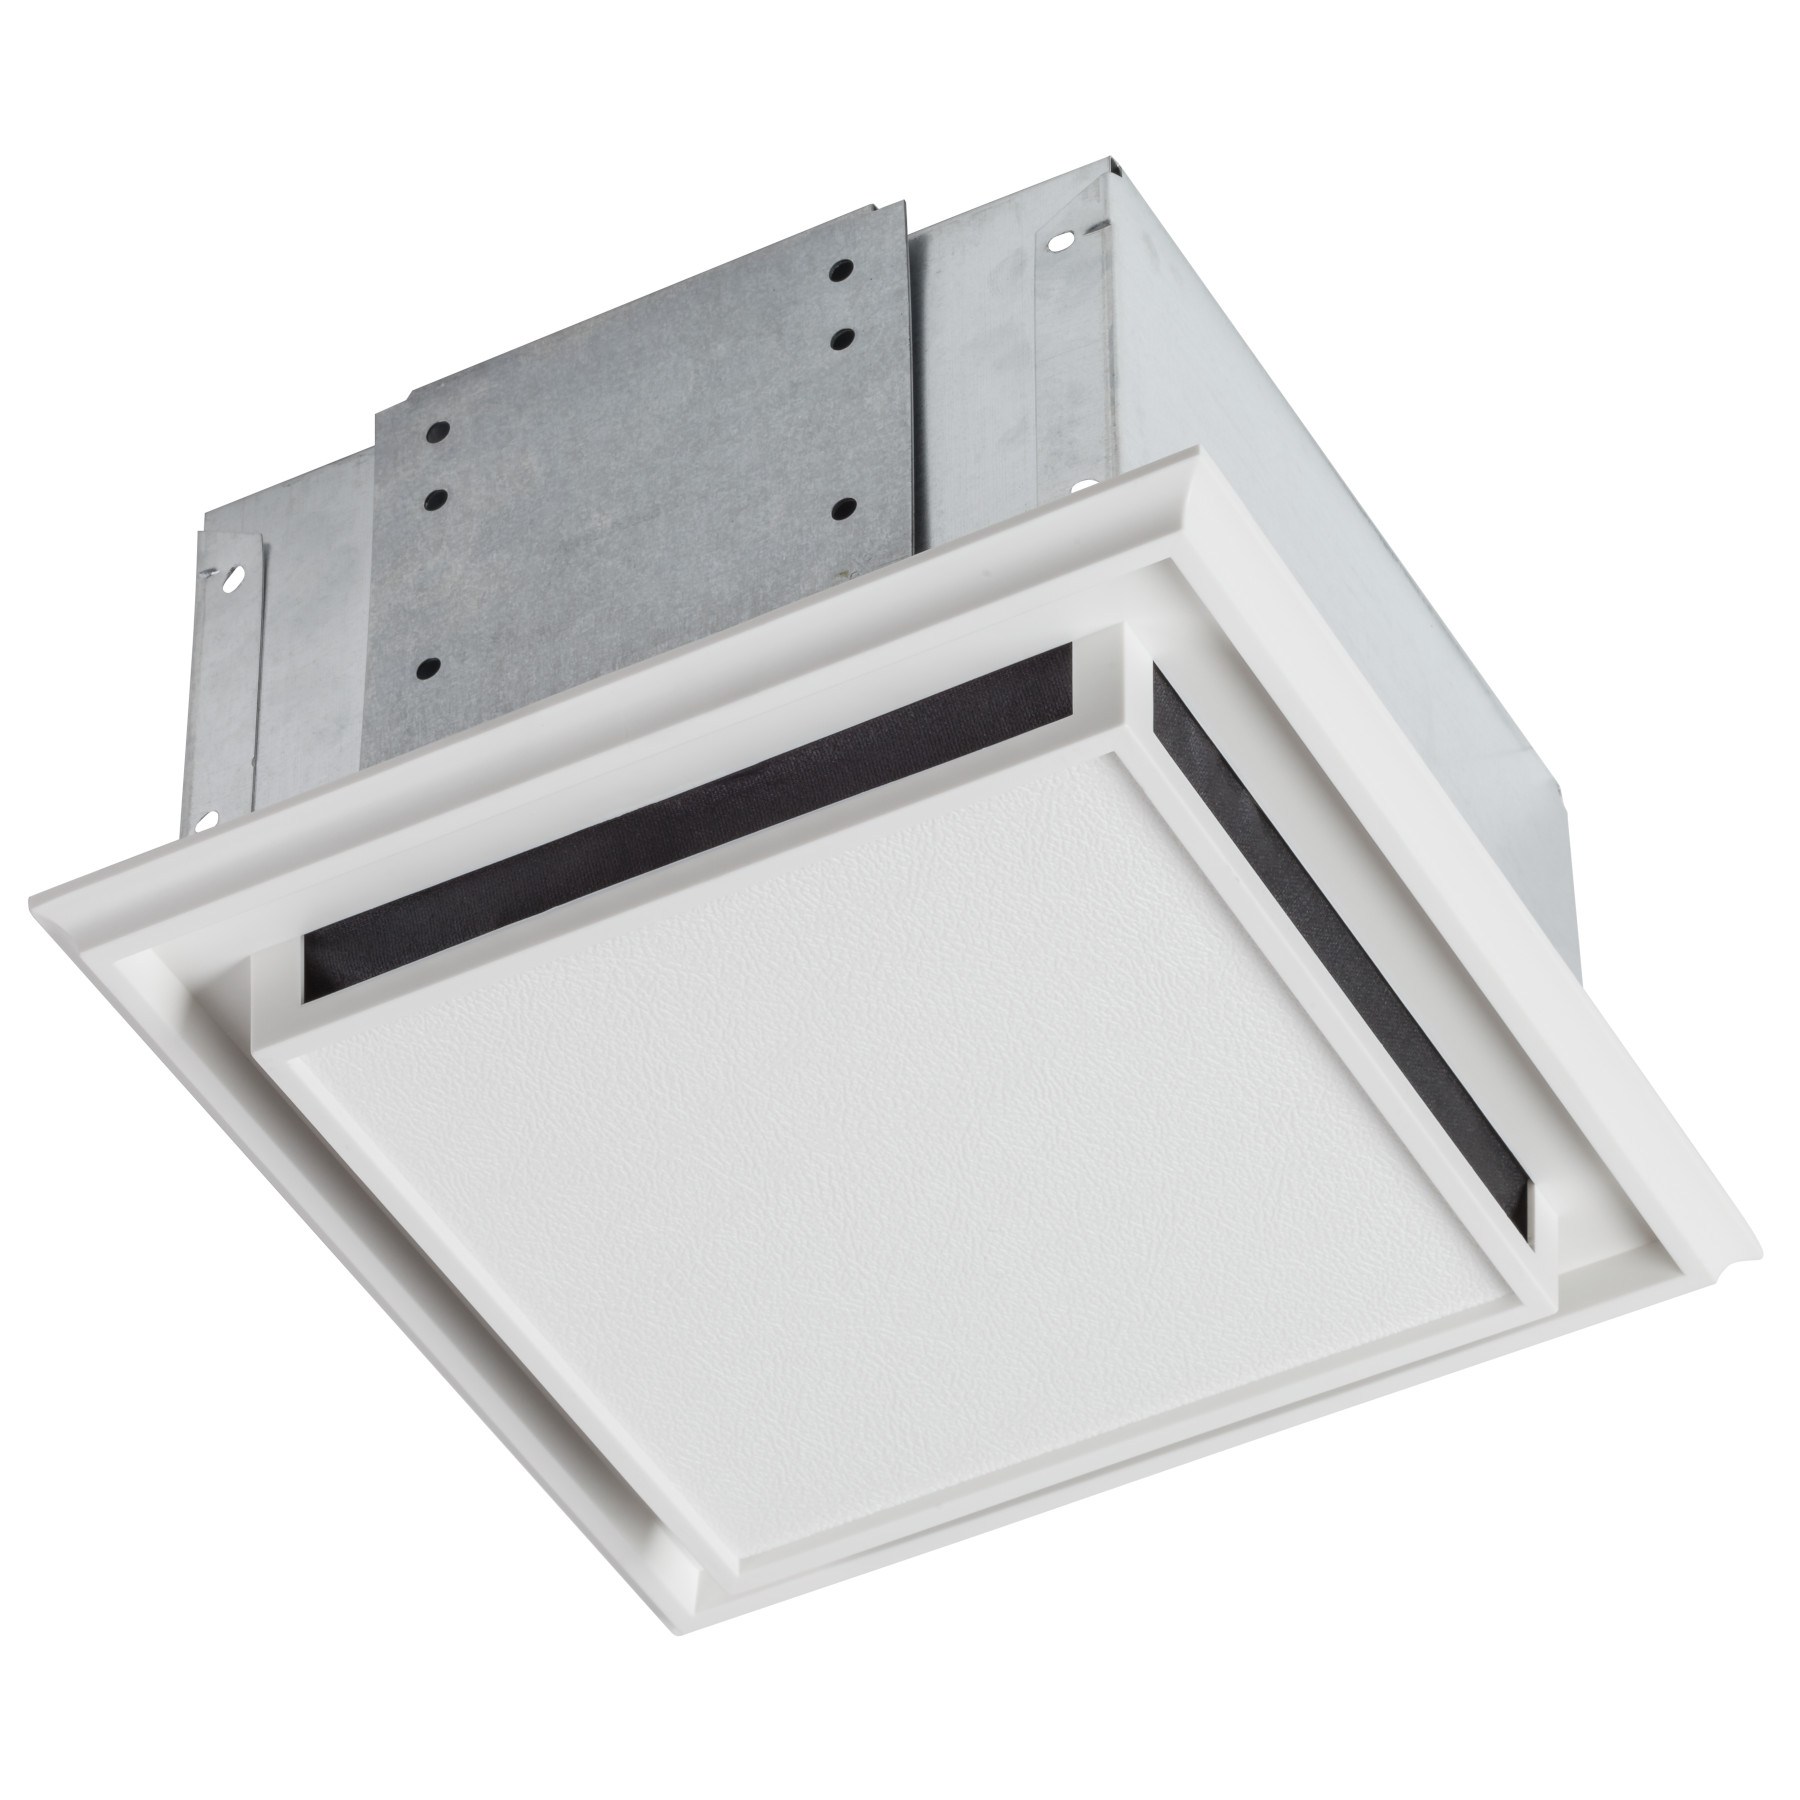 NuTone® Duct-free Ventilation Fan with plastic grille, snap-in mounting and charcoal filter.